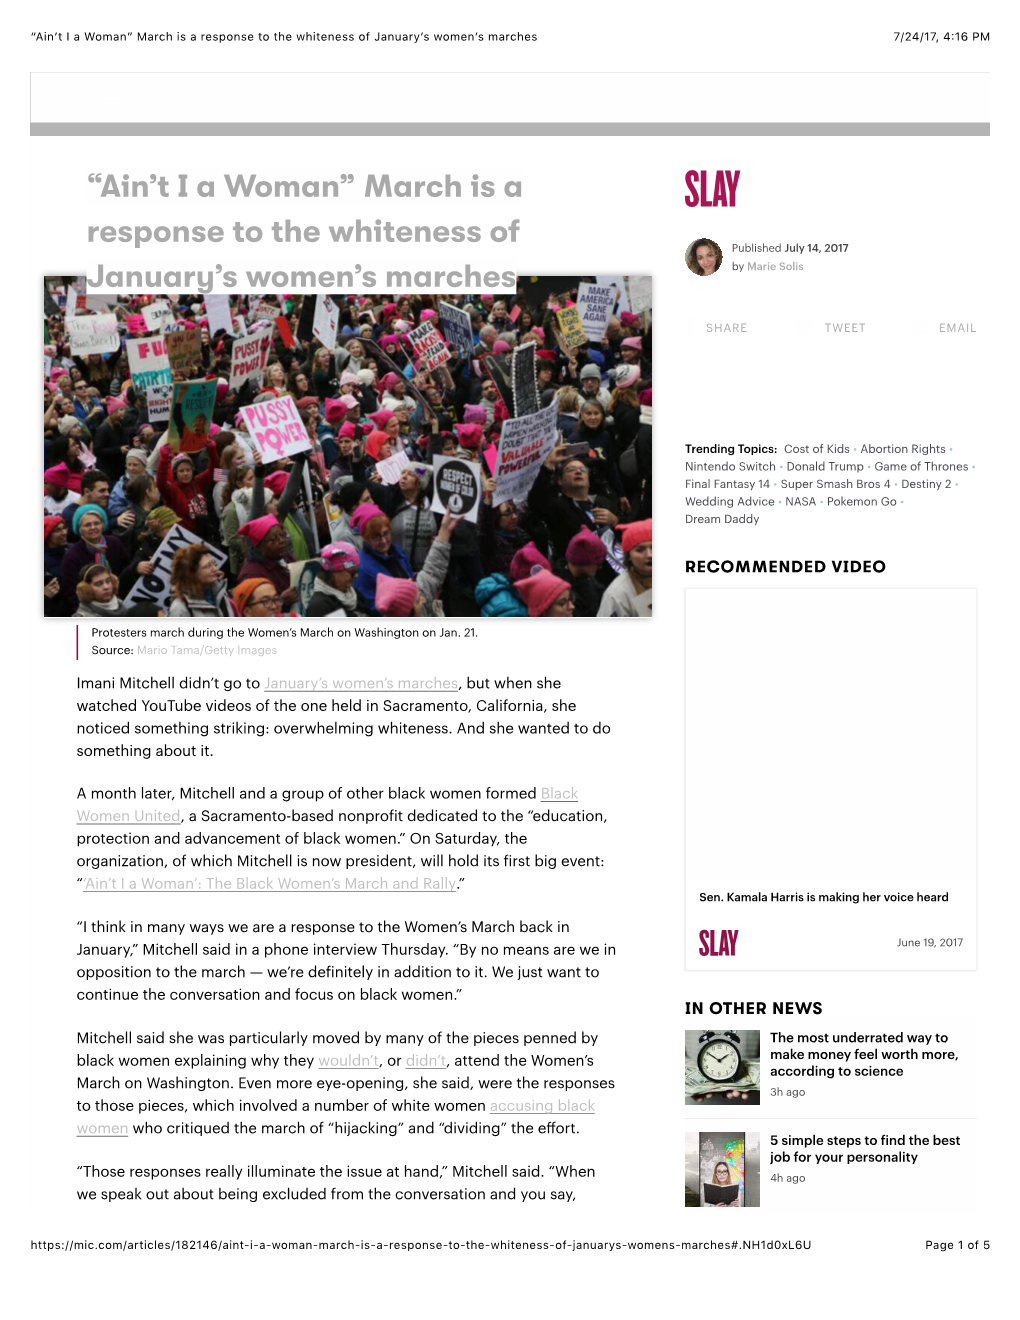 “Ain't I a Woman” March Is Response to the Whiteness of January's